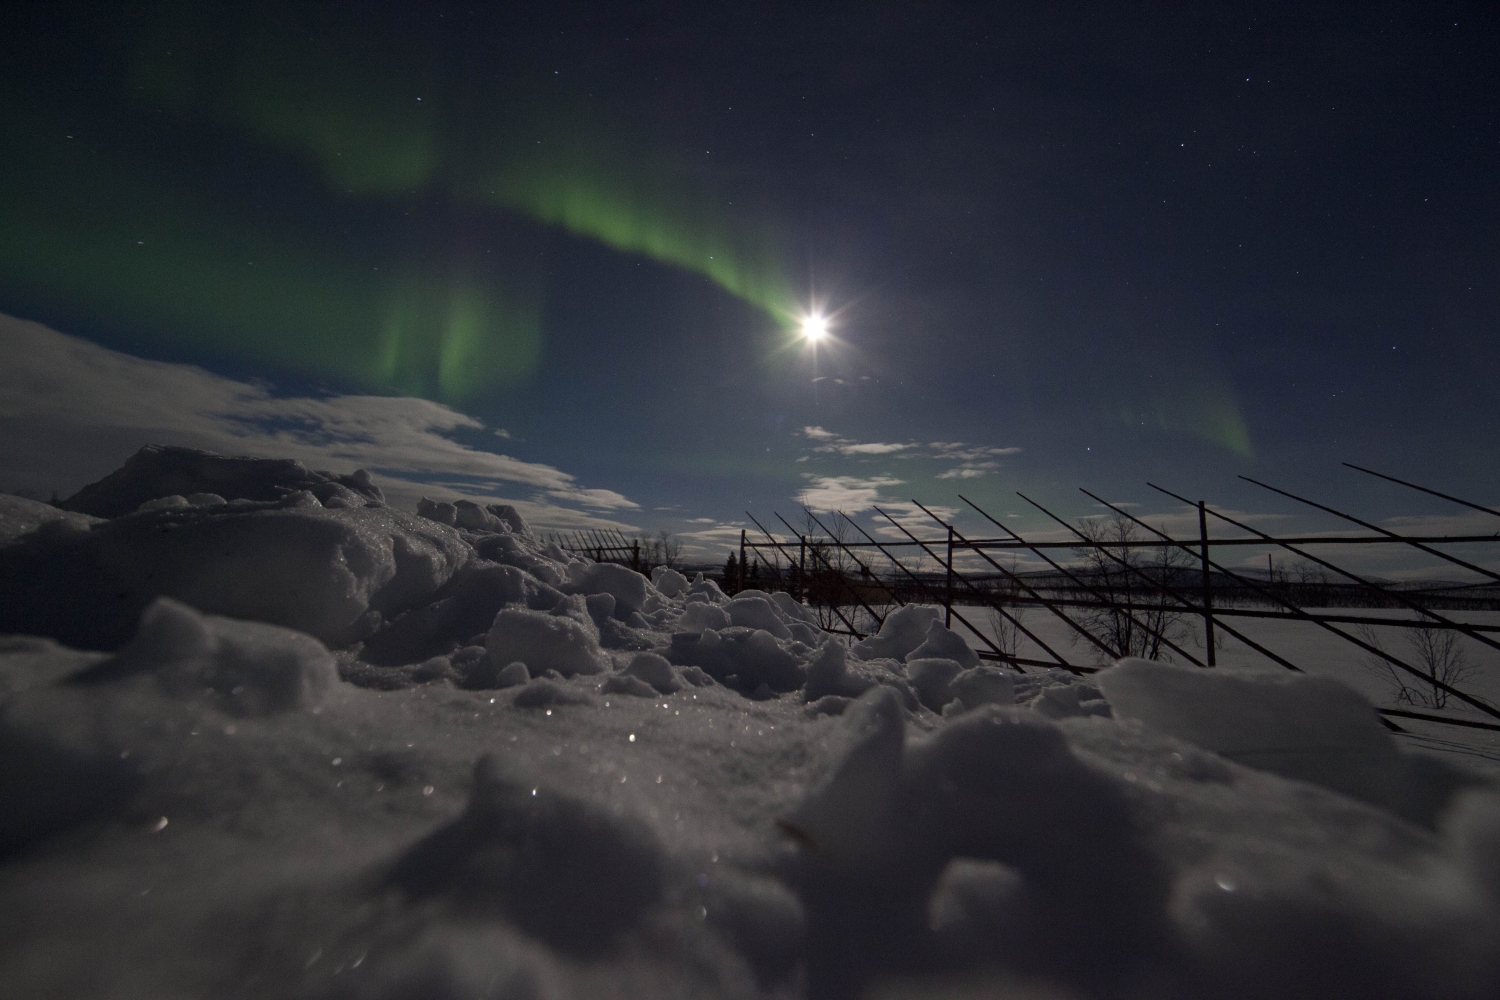 Northern lights over snow, moonlight in the background